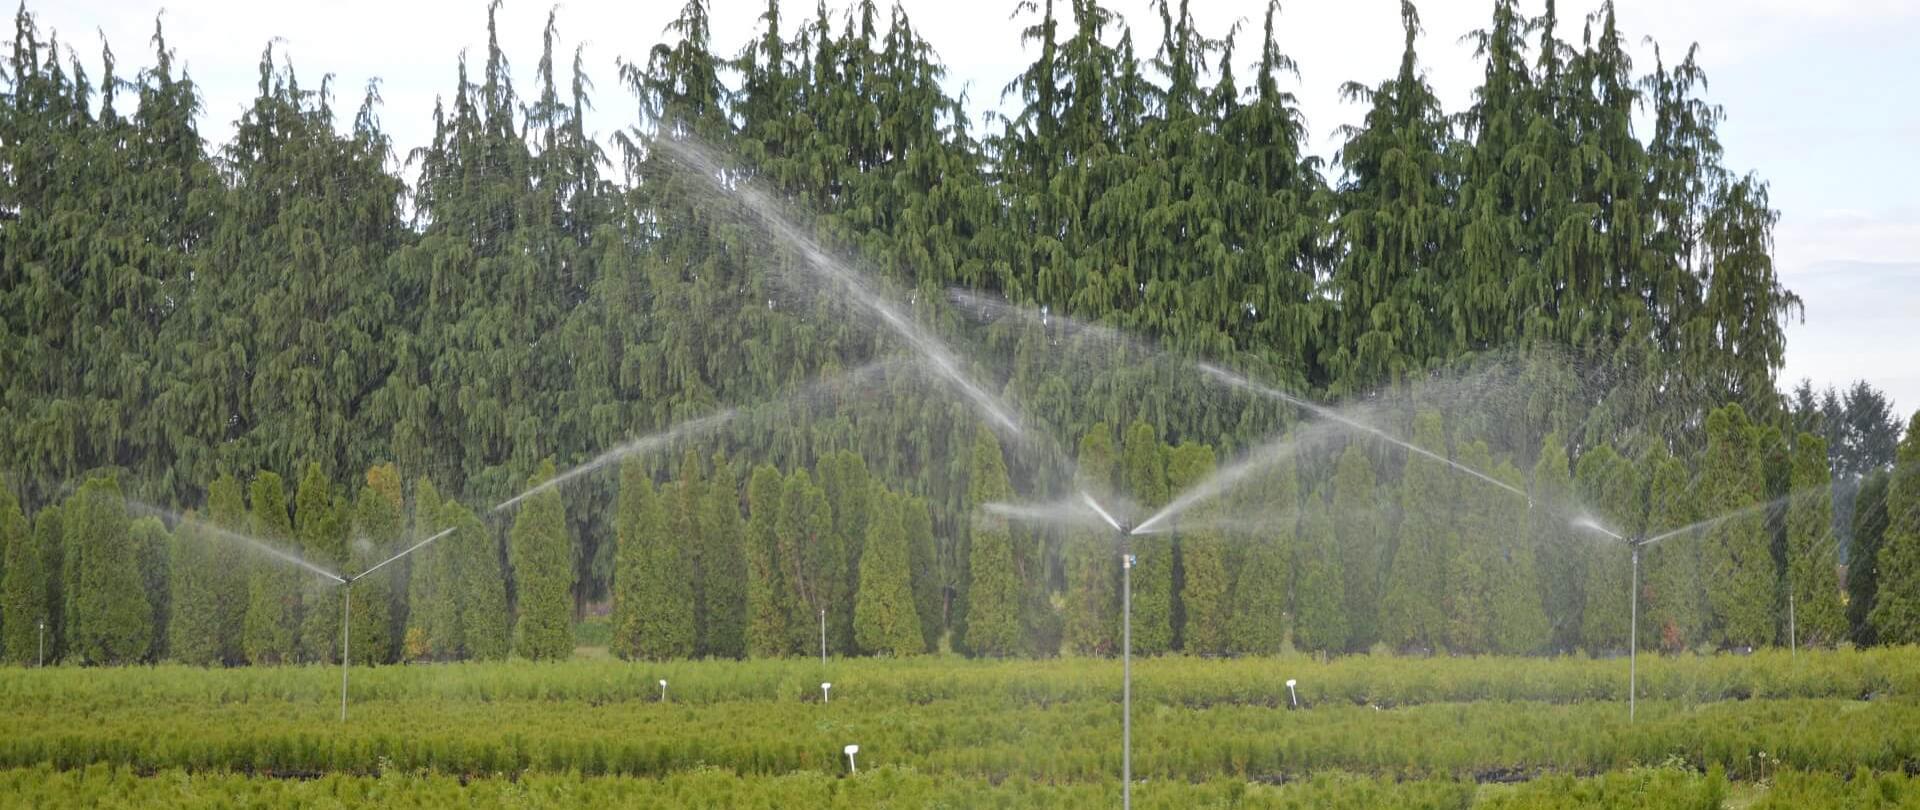 Precise plant irrigation is an extremely important element of the natural environment protection policy.